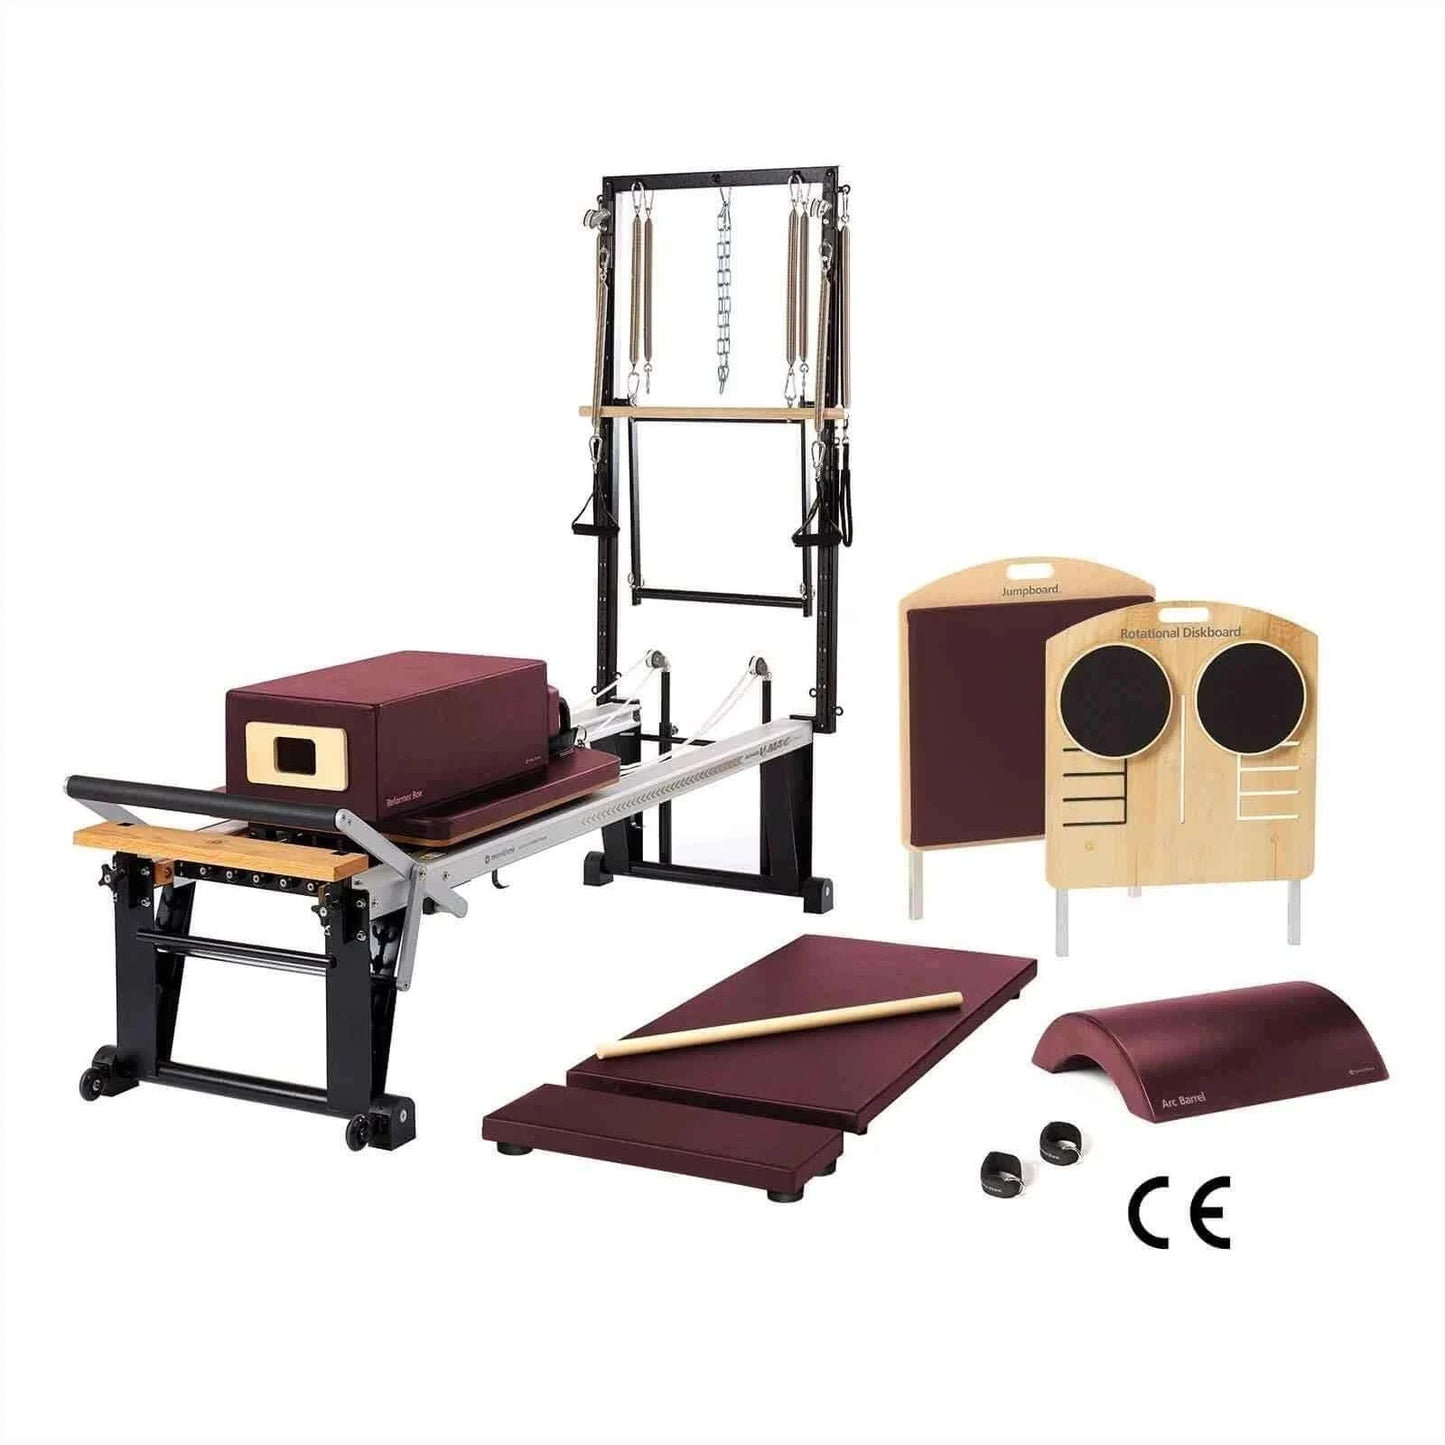 Red Truffle Merrithew™ Pilates Rehab Studio 1 Bundle (Mat/Reformer) by Merrithew™ sold by Pilates Matters® by BSP LLC